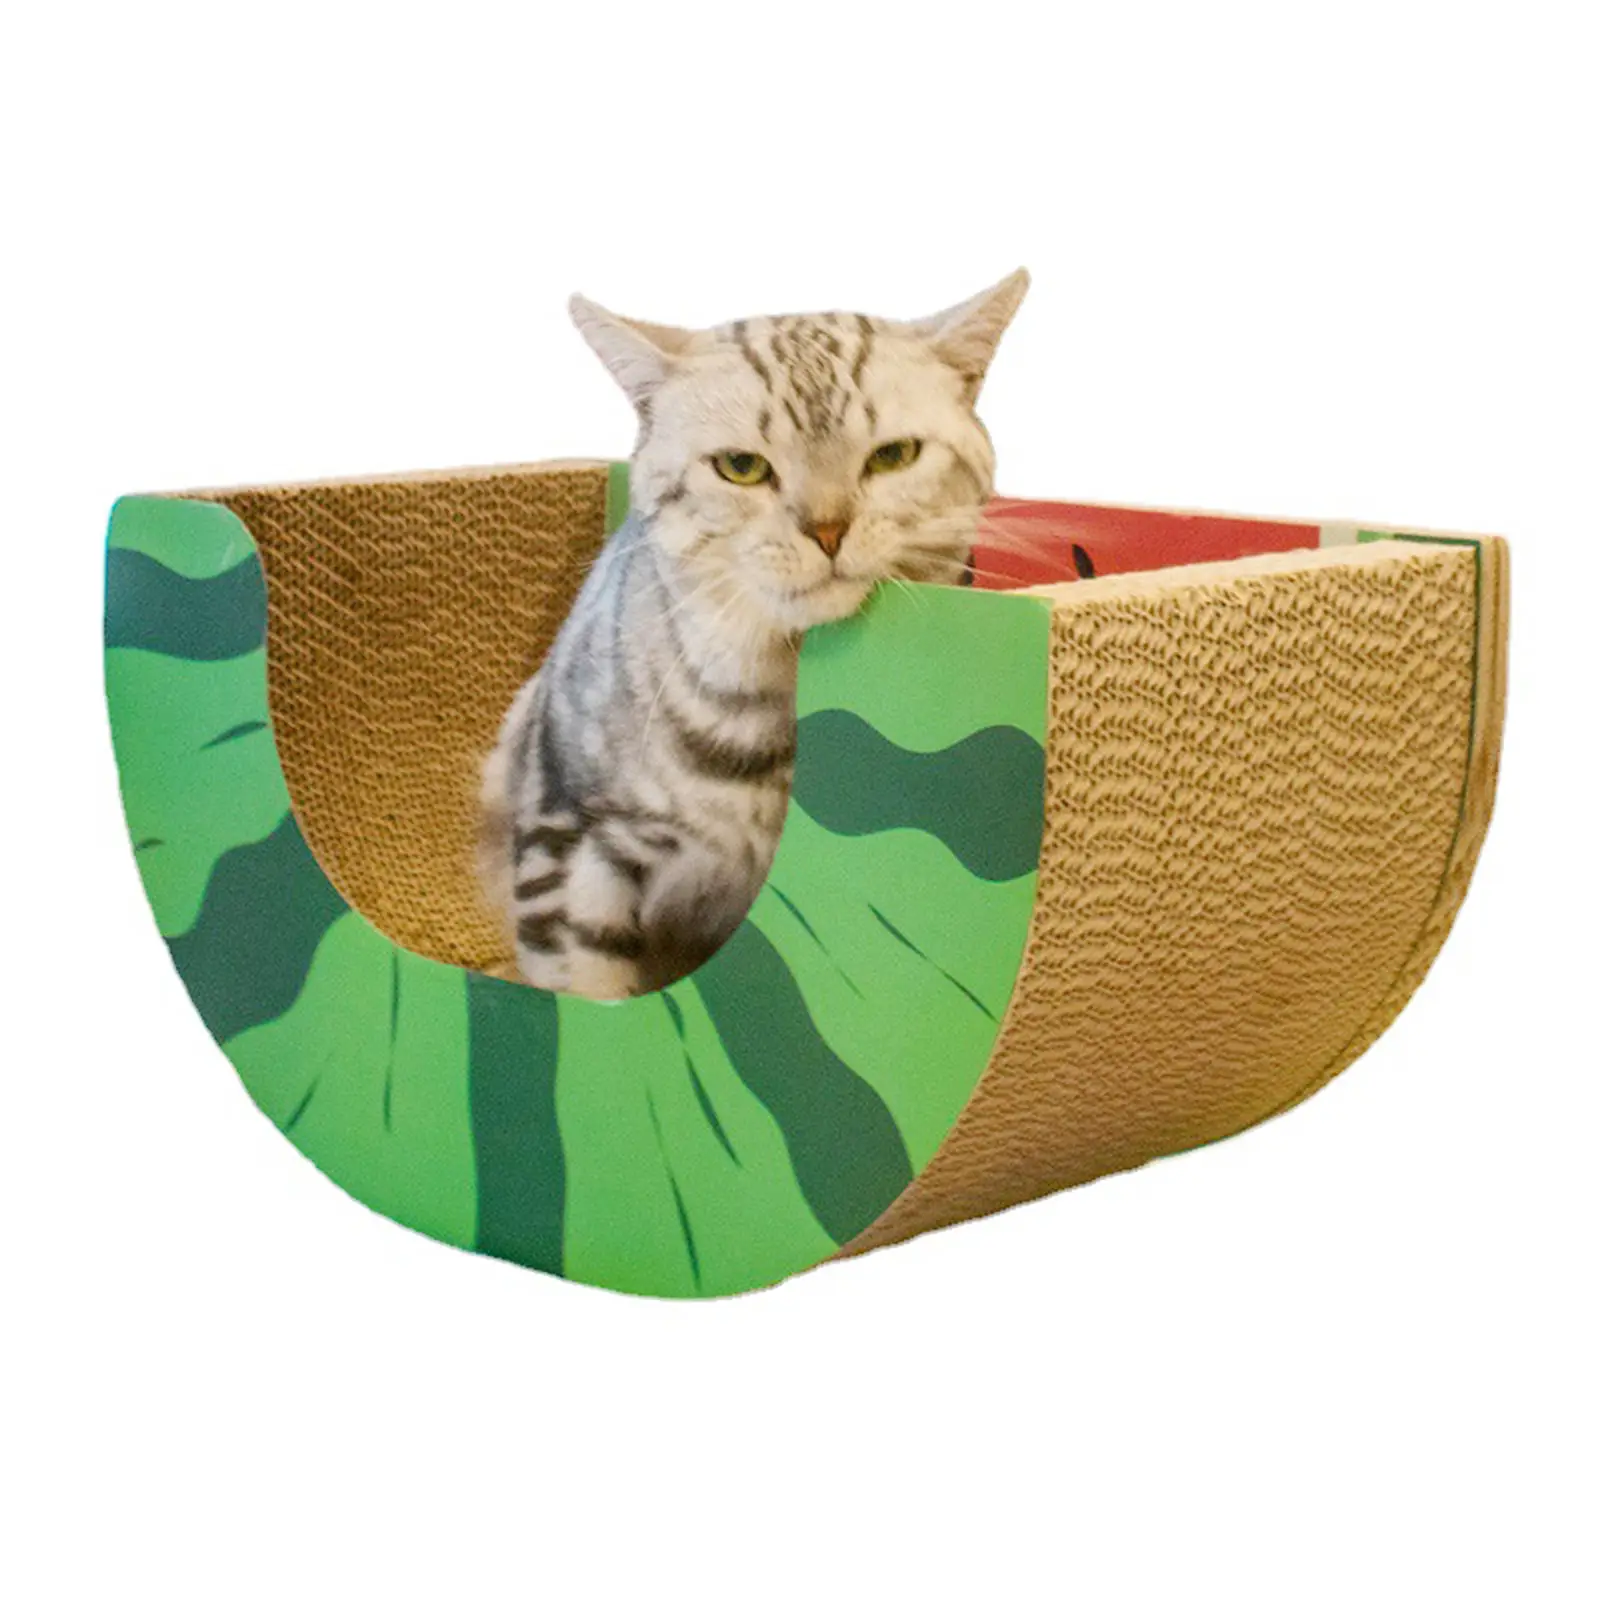 Corrugated Cat House Fruit Toy with Scratching Board Cat House Cardboard Catnip for Adult Cats Dog Couch Living Room